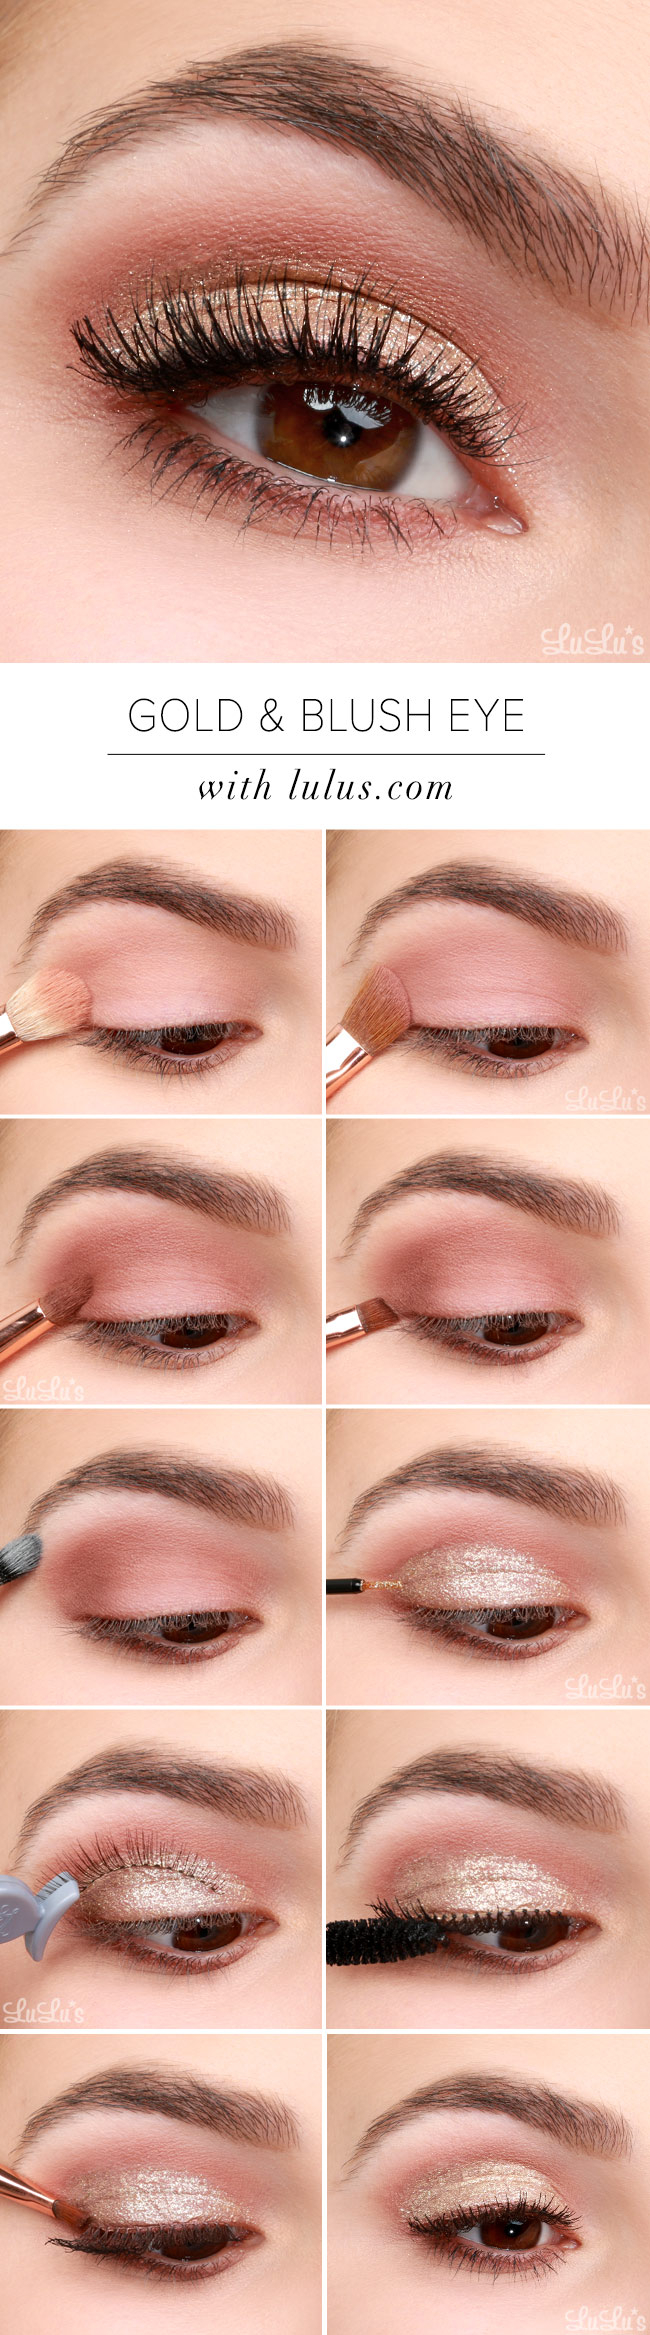 Day Eye Makeup Lulus How To Gold And Blush Valentines Day Eye Makeup Tutorial